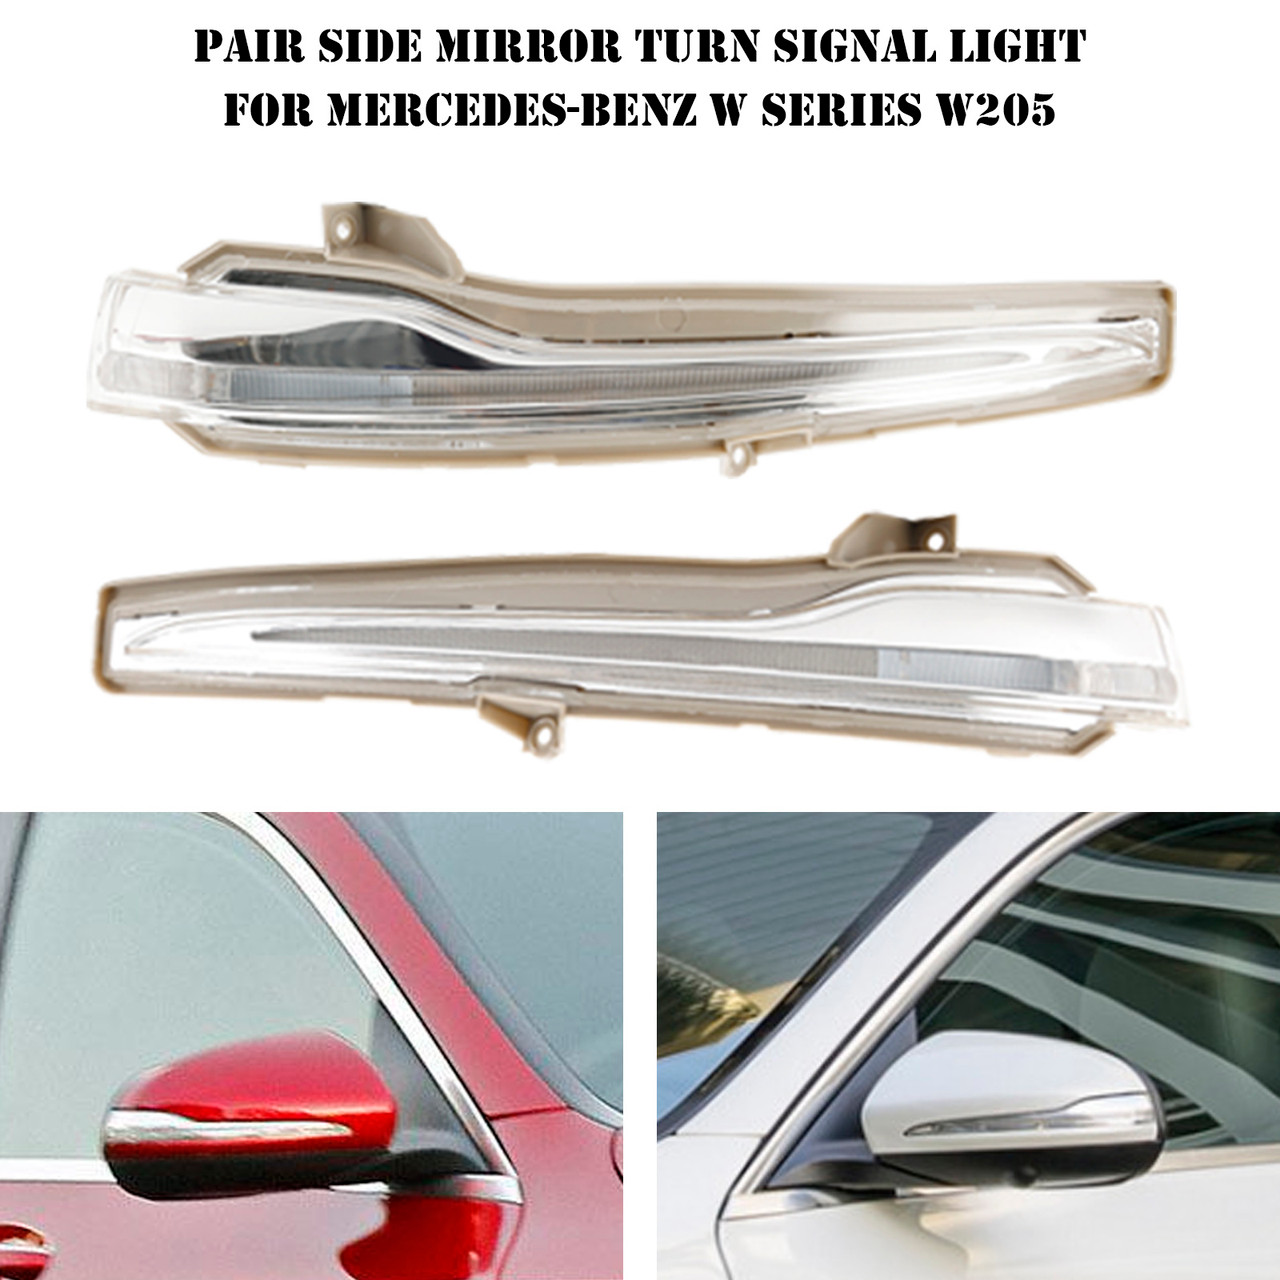 Pair Side Mirror Turn Signal Light For Mercedes-Benz W Series W205 A0999067401